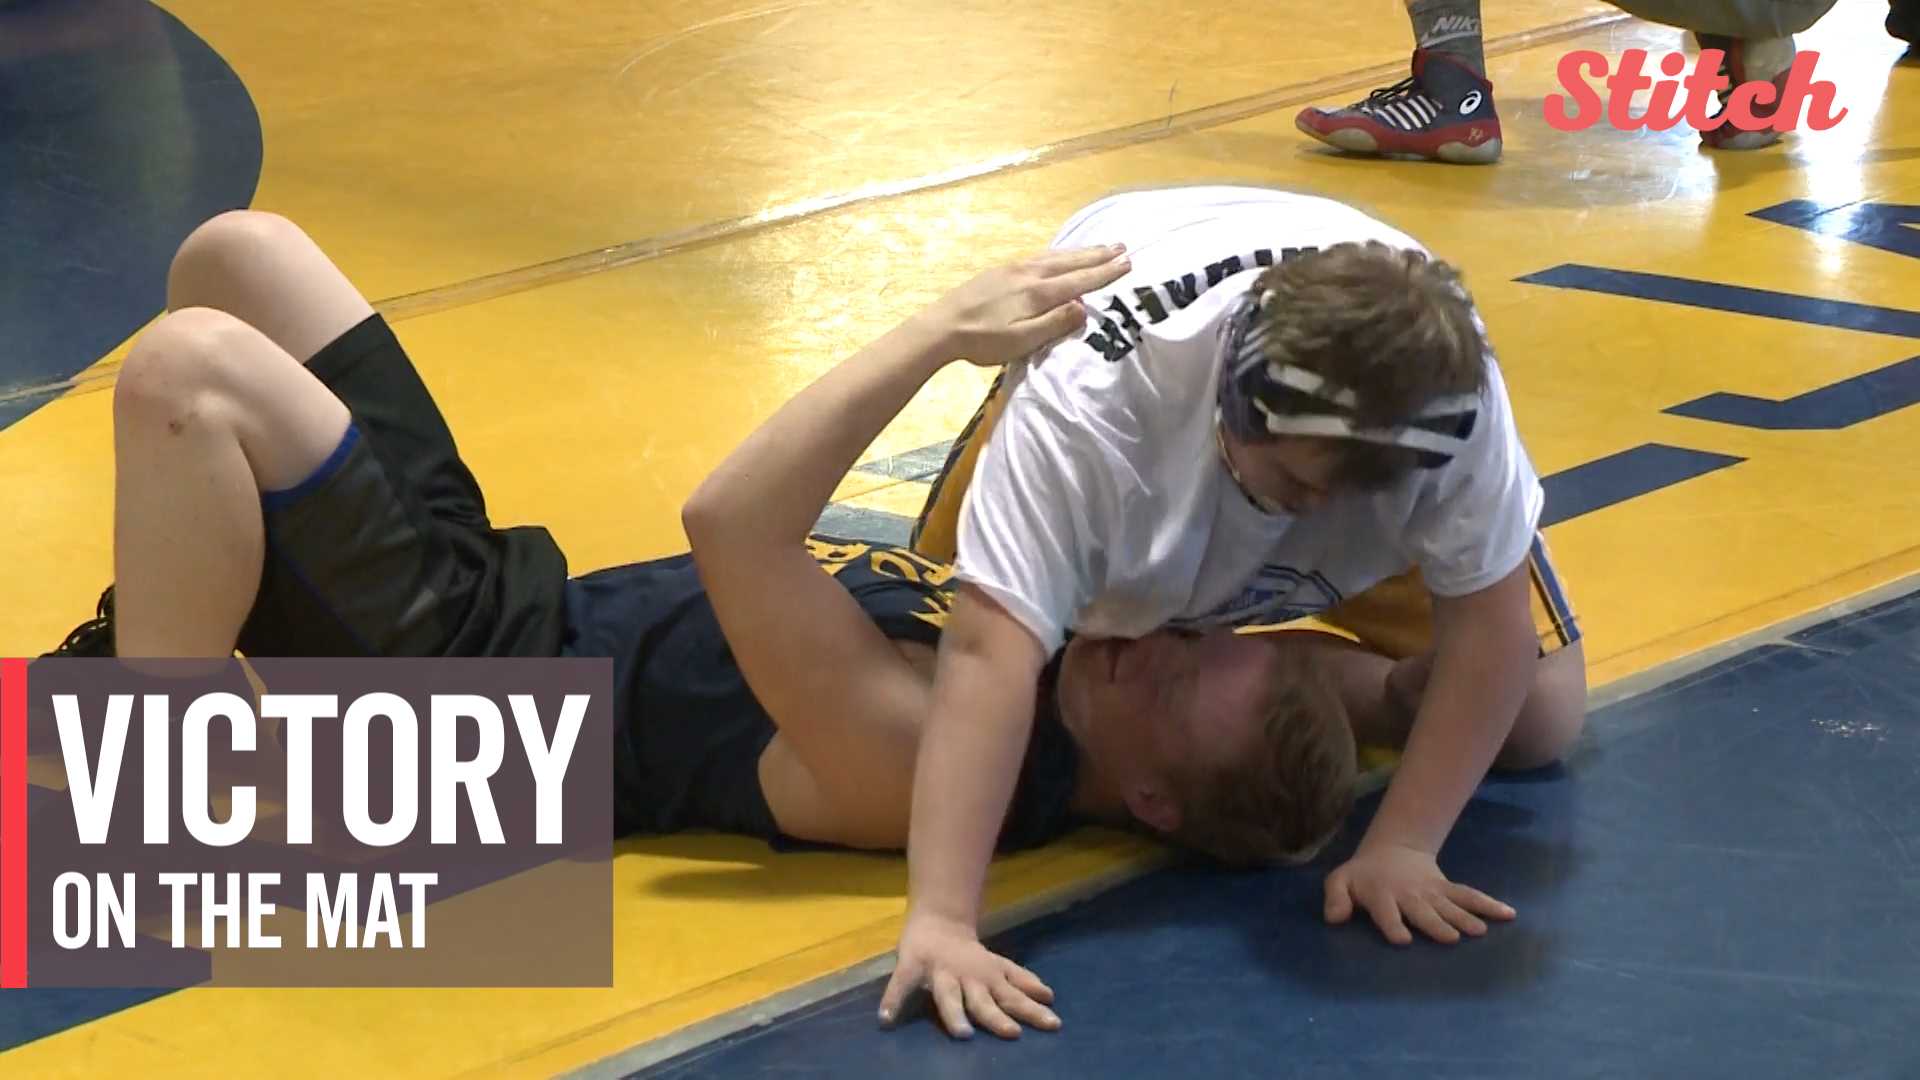 Student with Down syndrome achieves first wrestling victory